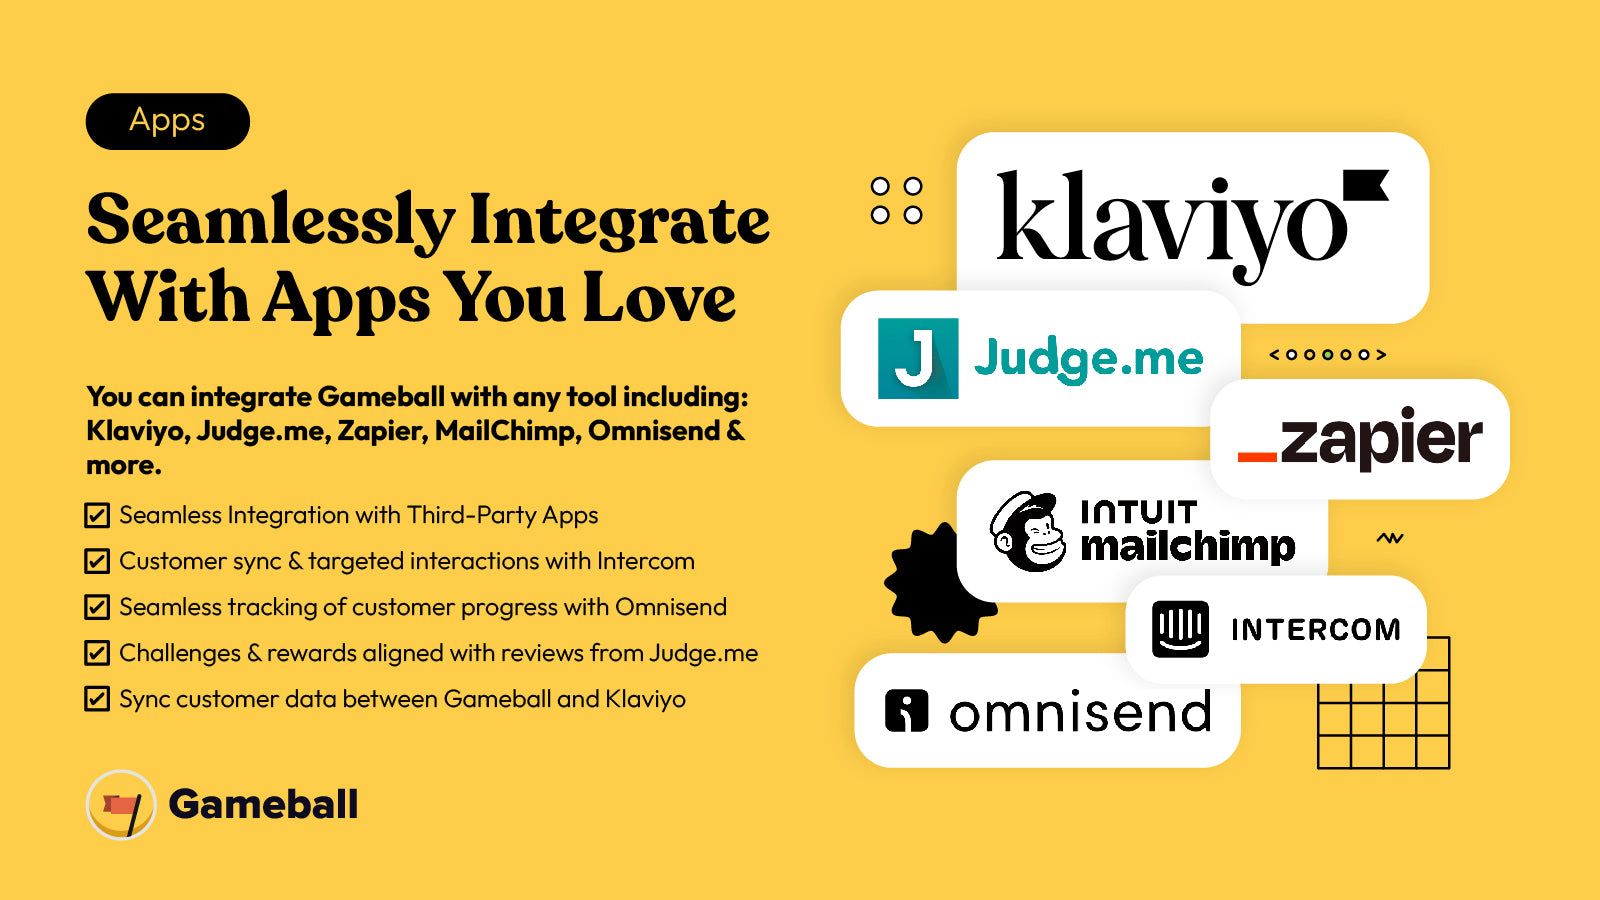 Seamlessly Integrate With Apps You Love